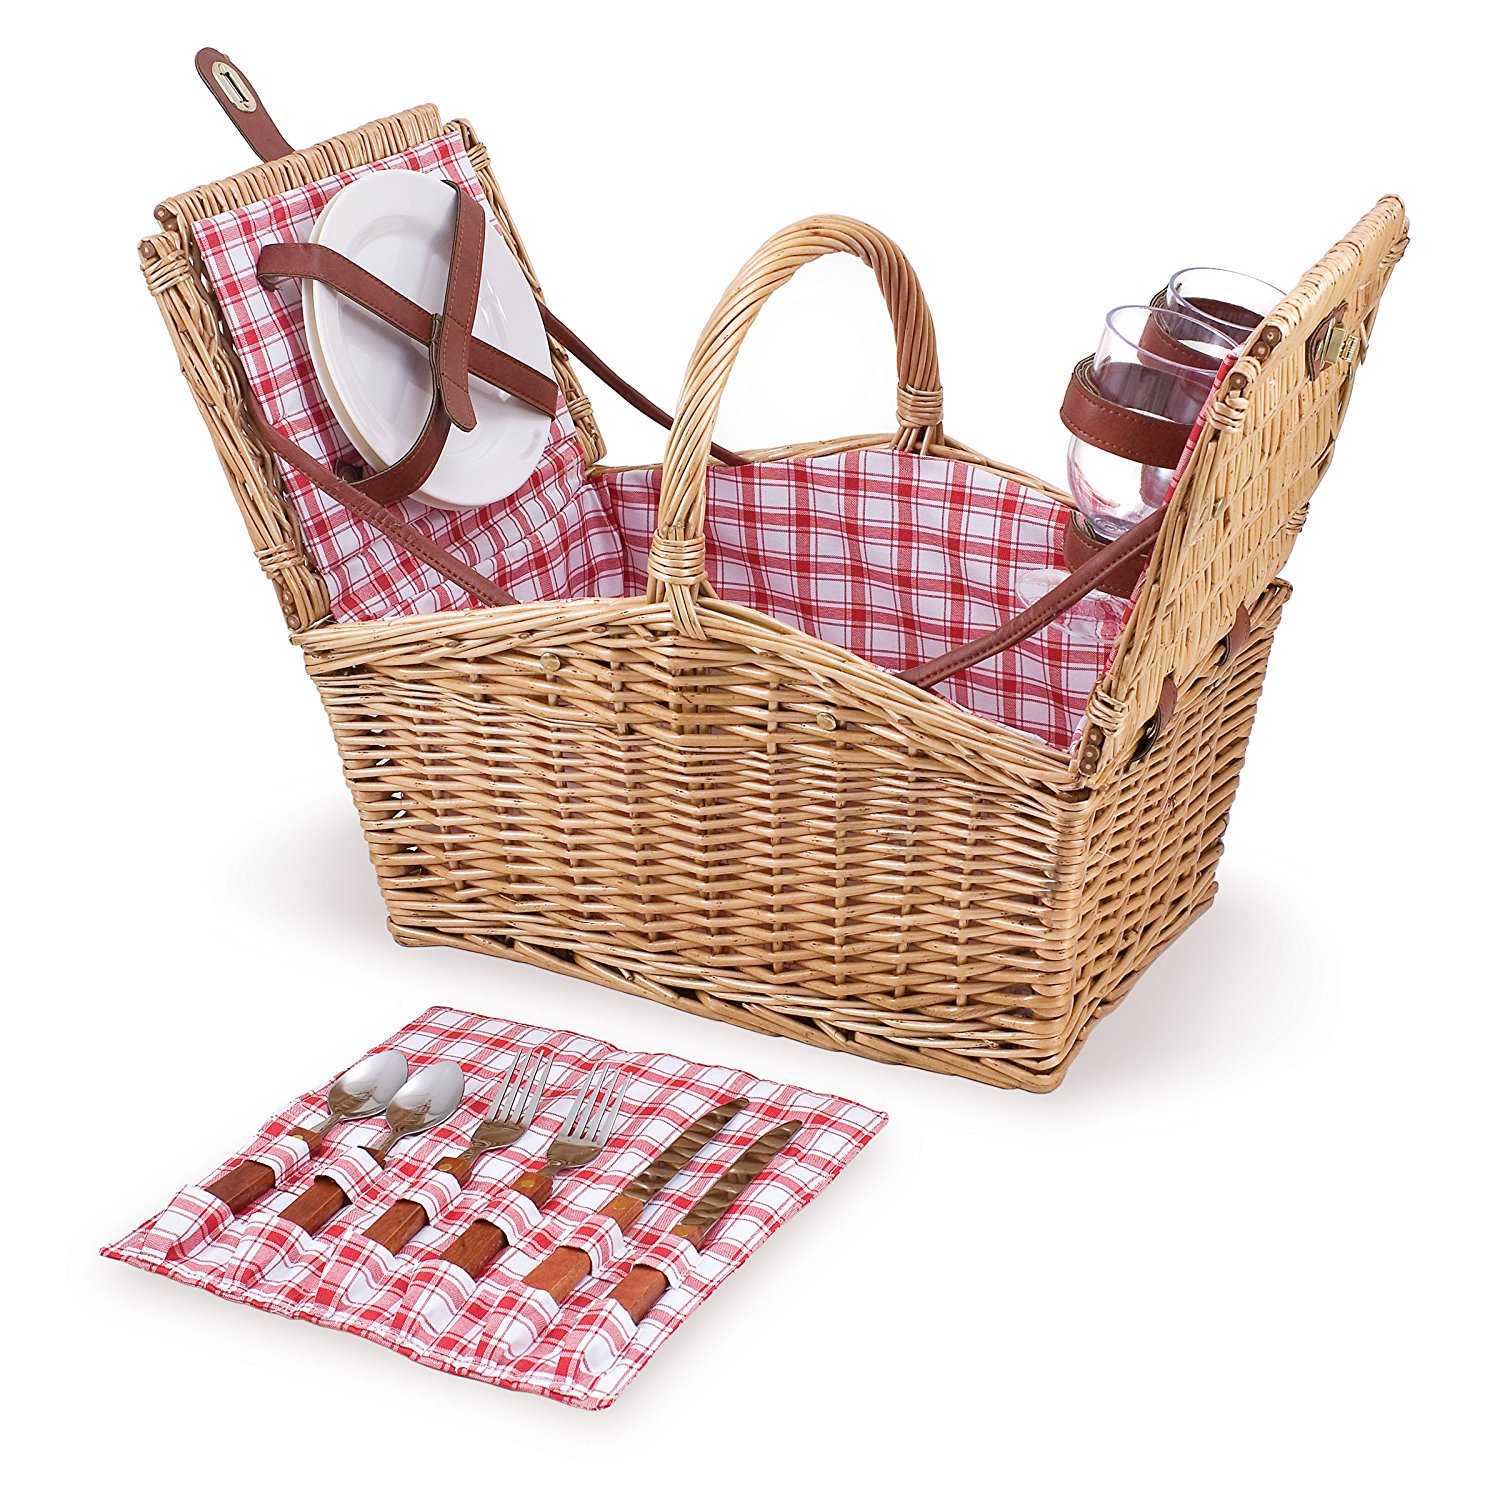 Amazon.com: Picnic Time Piccadilly Willow Picnic Basket for Two ...